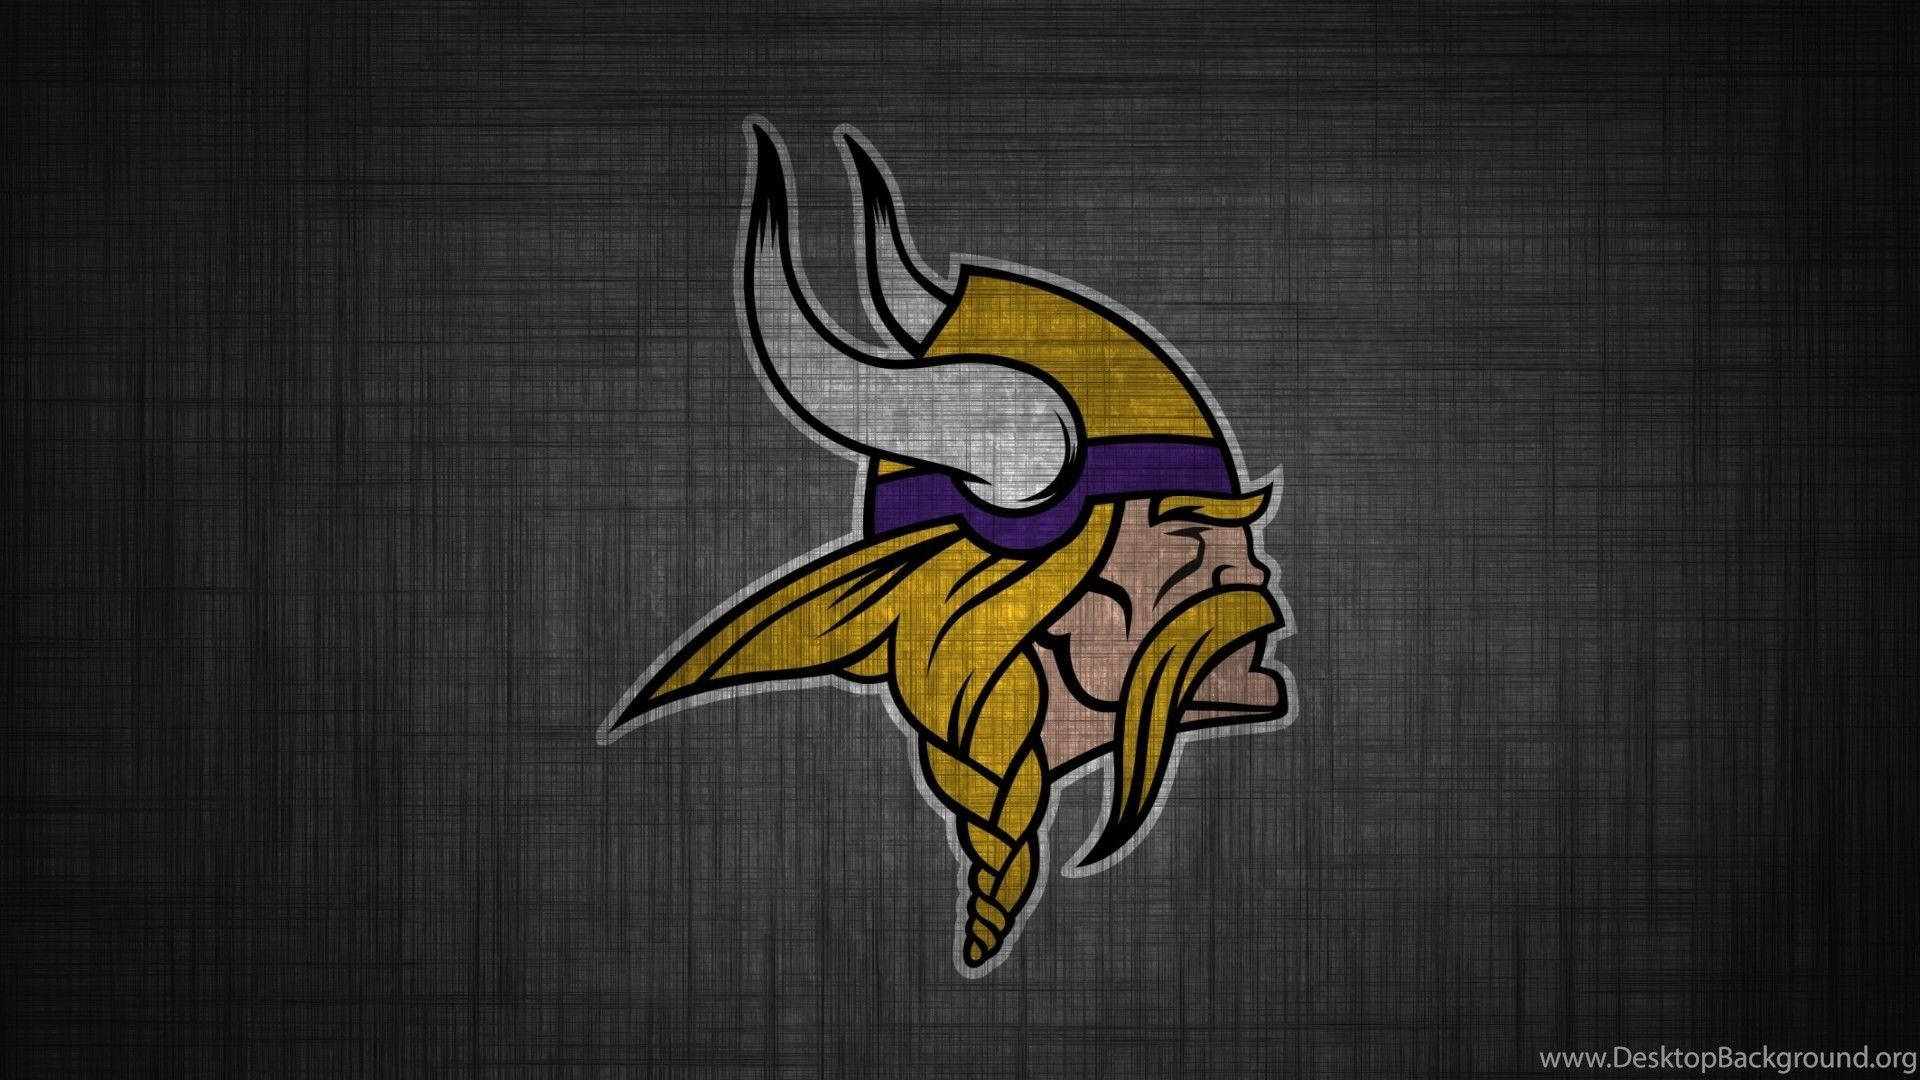 mn vikings official site